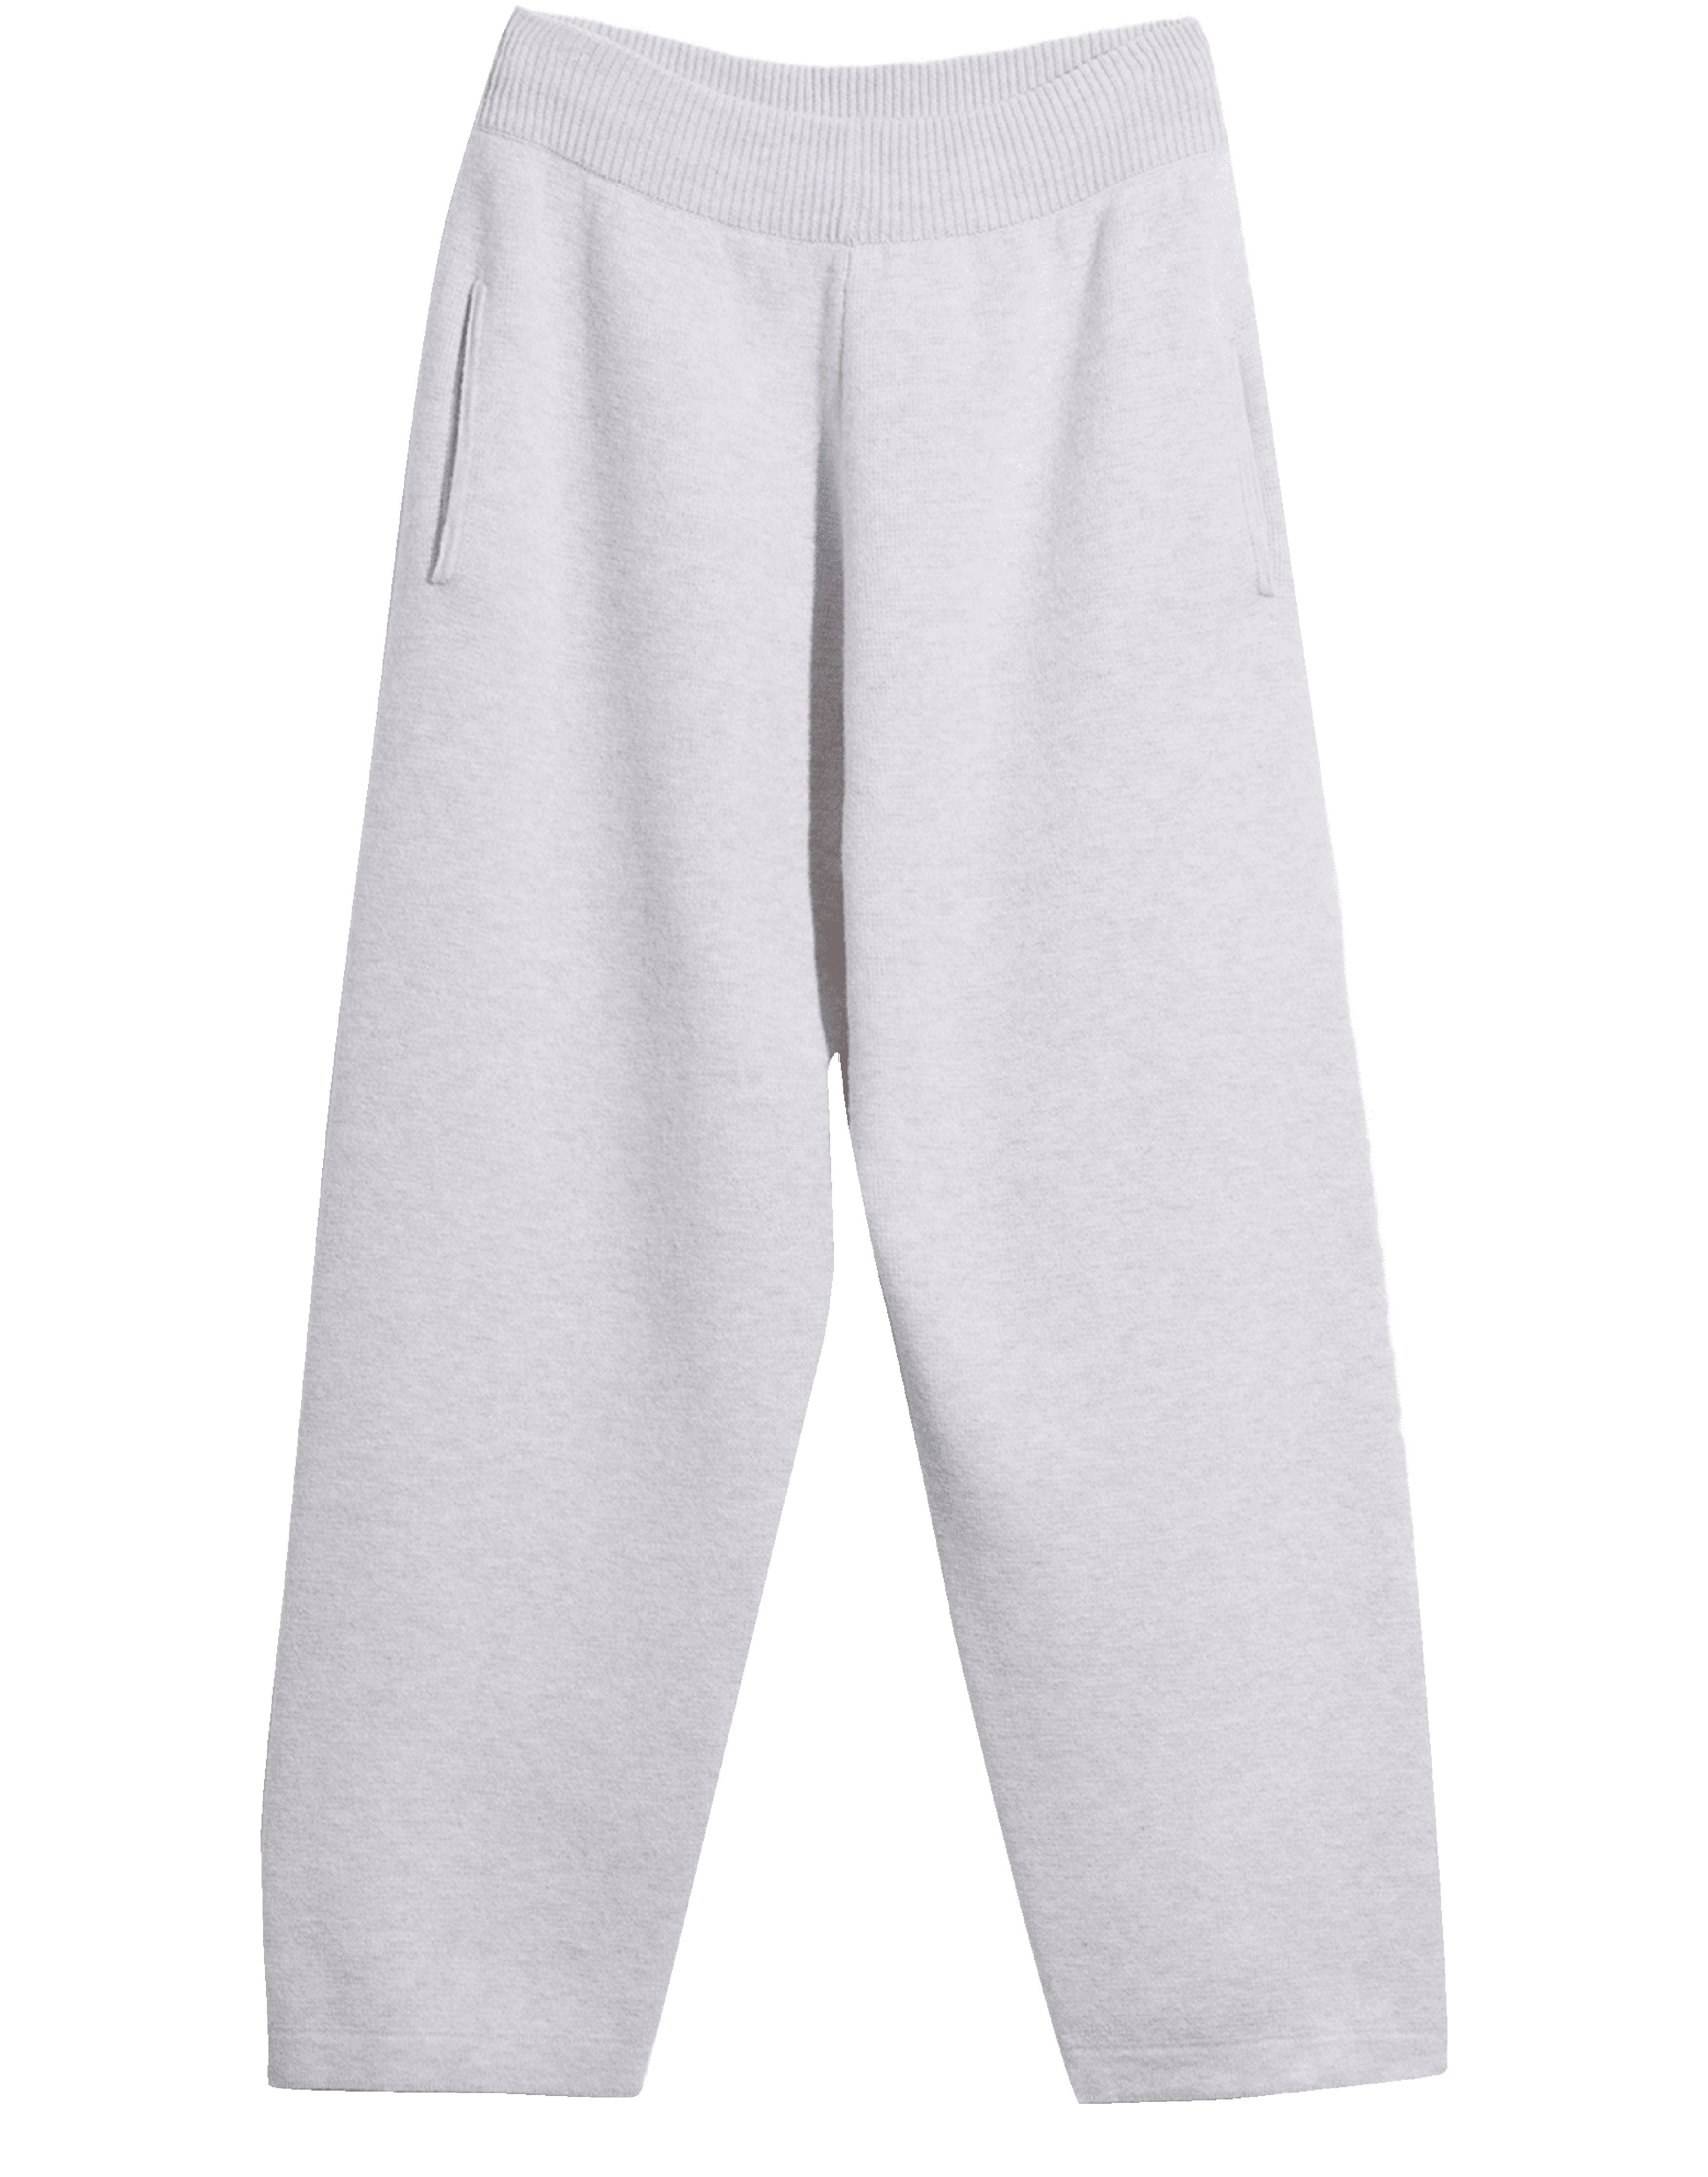 Barrie Sportswear cashmere and cotton joggers